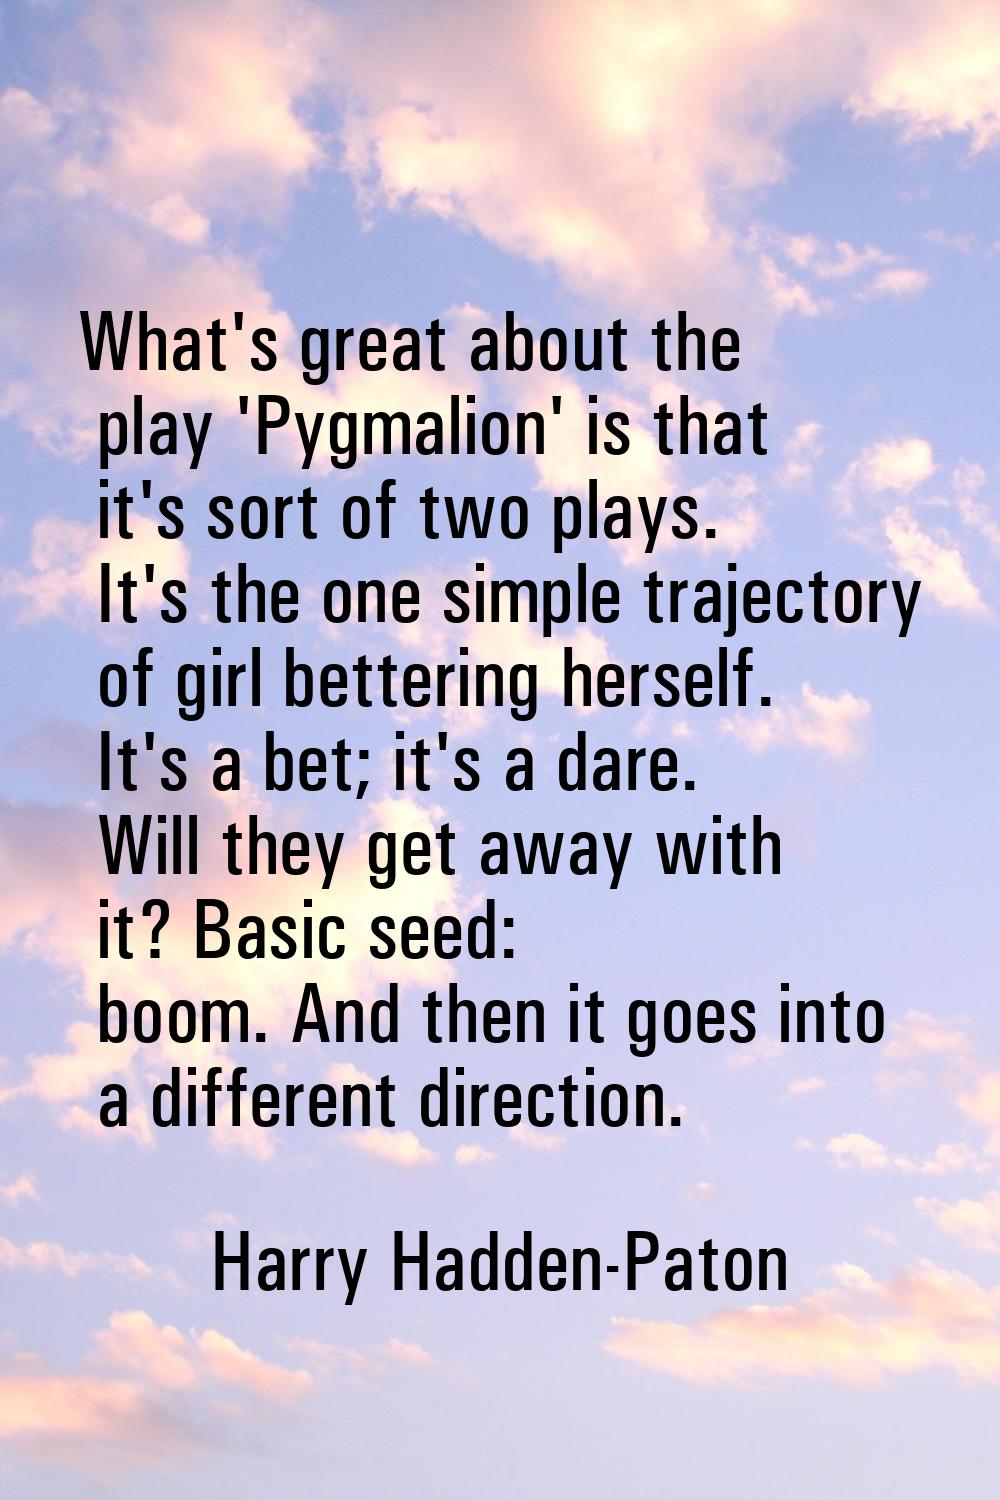 What's great about the play 'Pygmalion' is that it's sort of two plays. It's the one simple traject